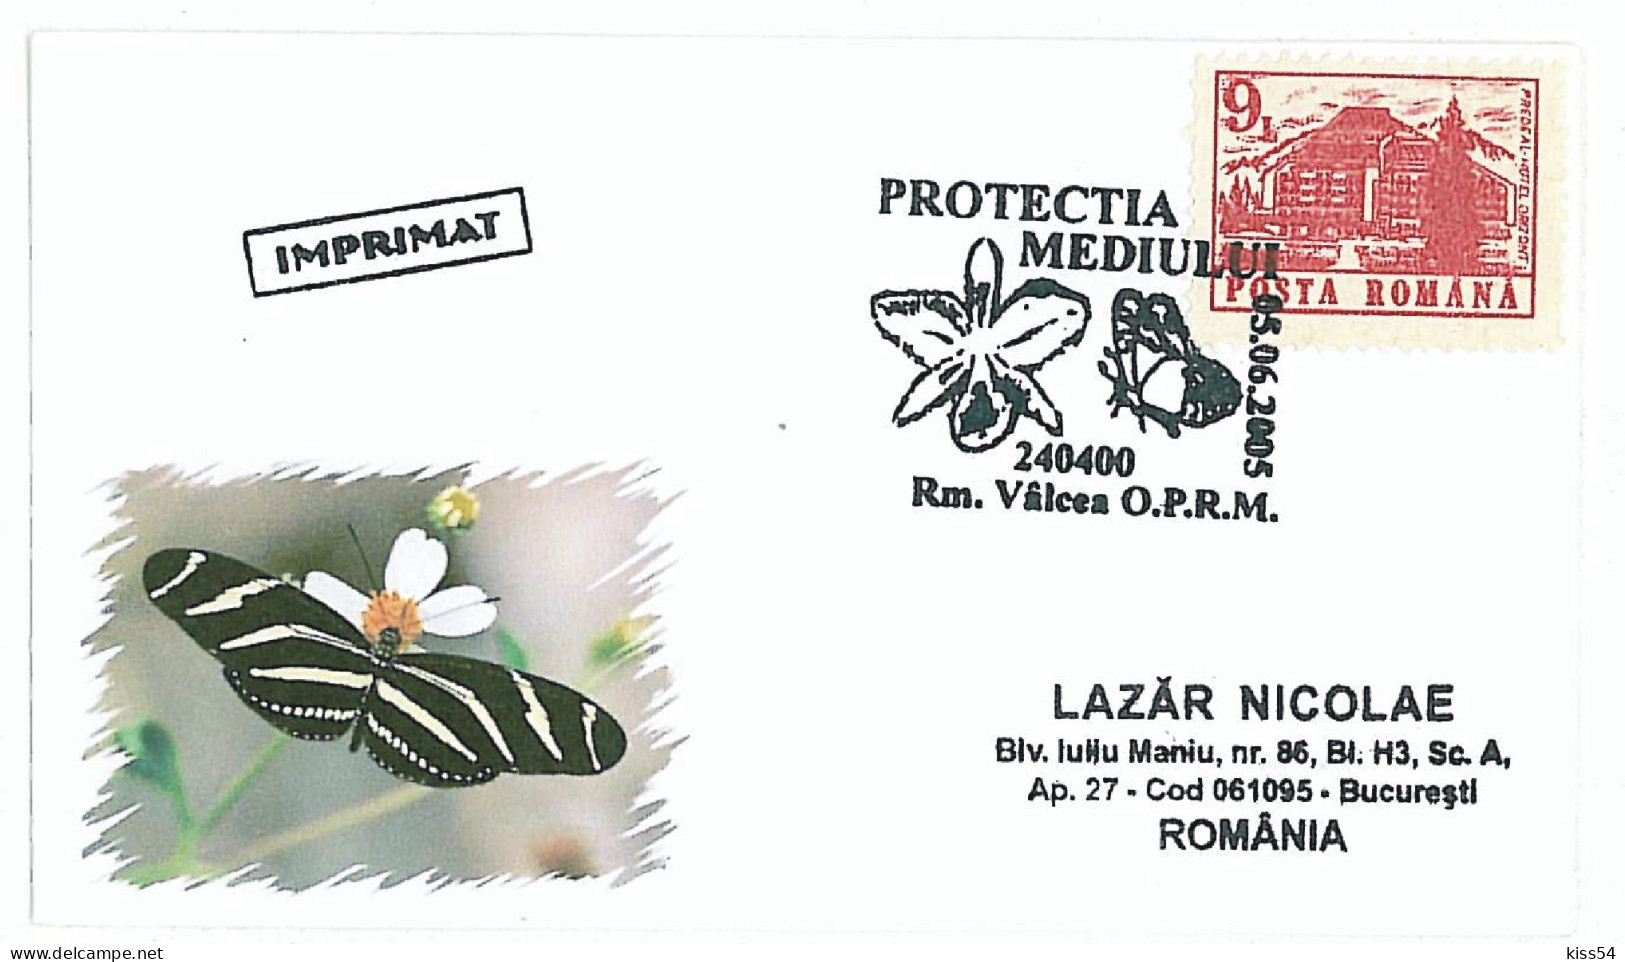 COV 22 - 1226-a, BUTTERFLY, Environmental Protection, Romania - Lilliput Cover - Used - 2005 - Maximum Cards & Covers